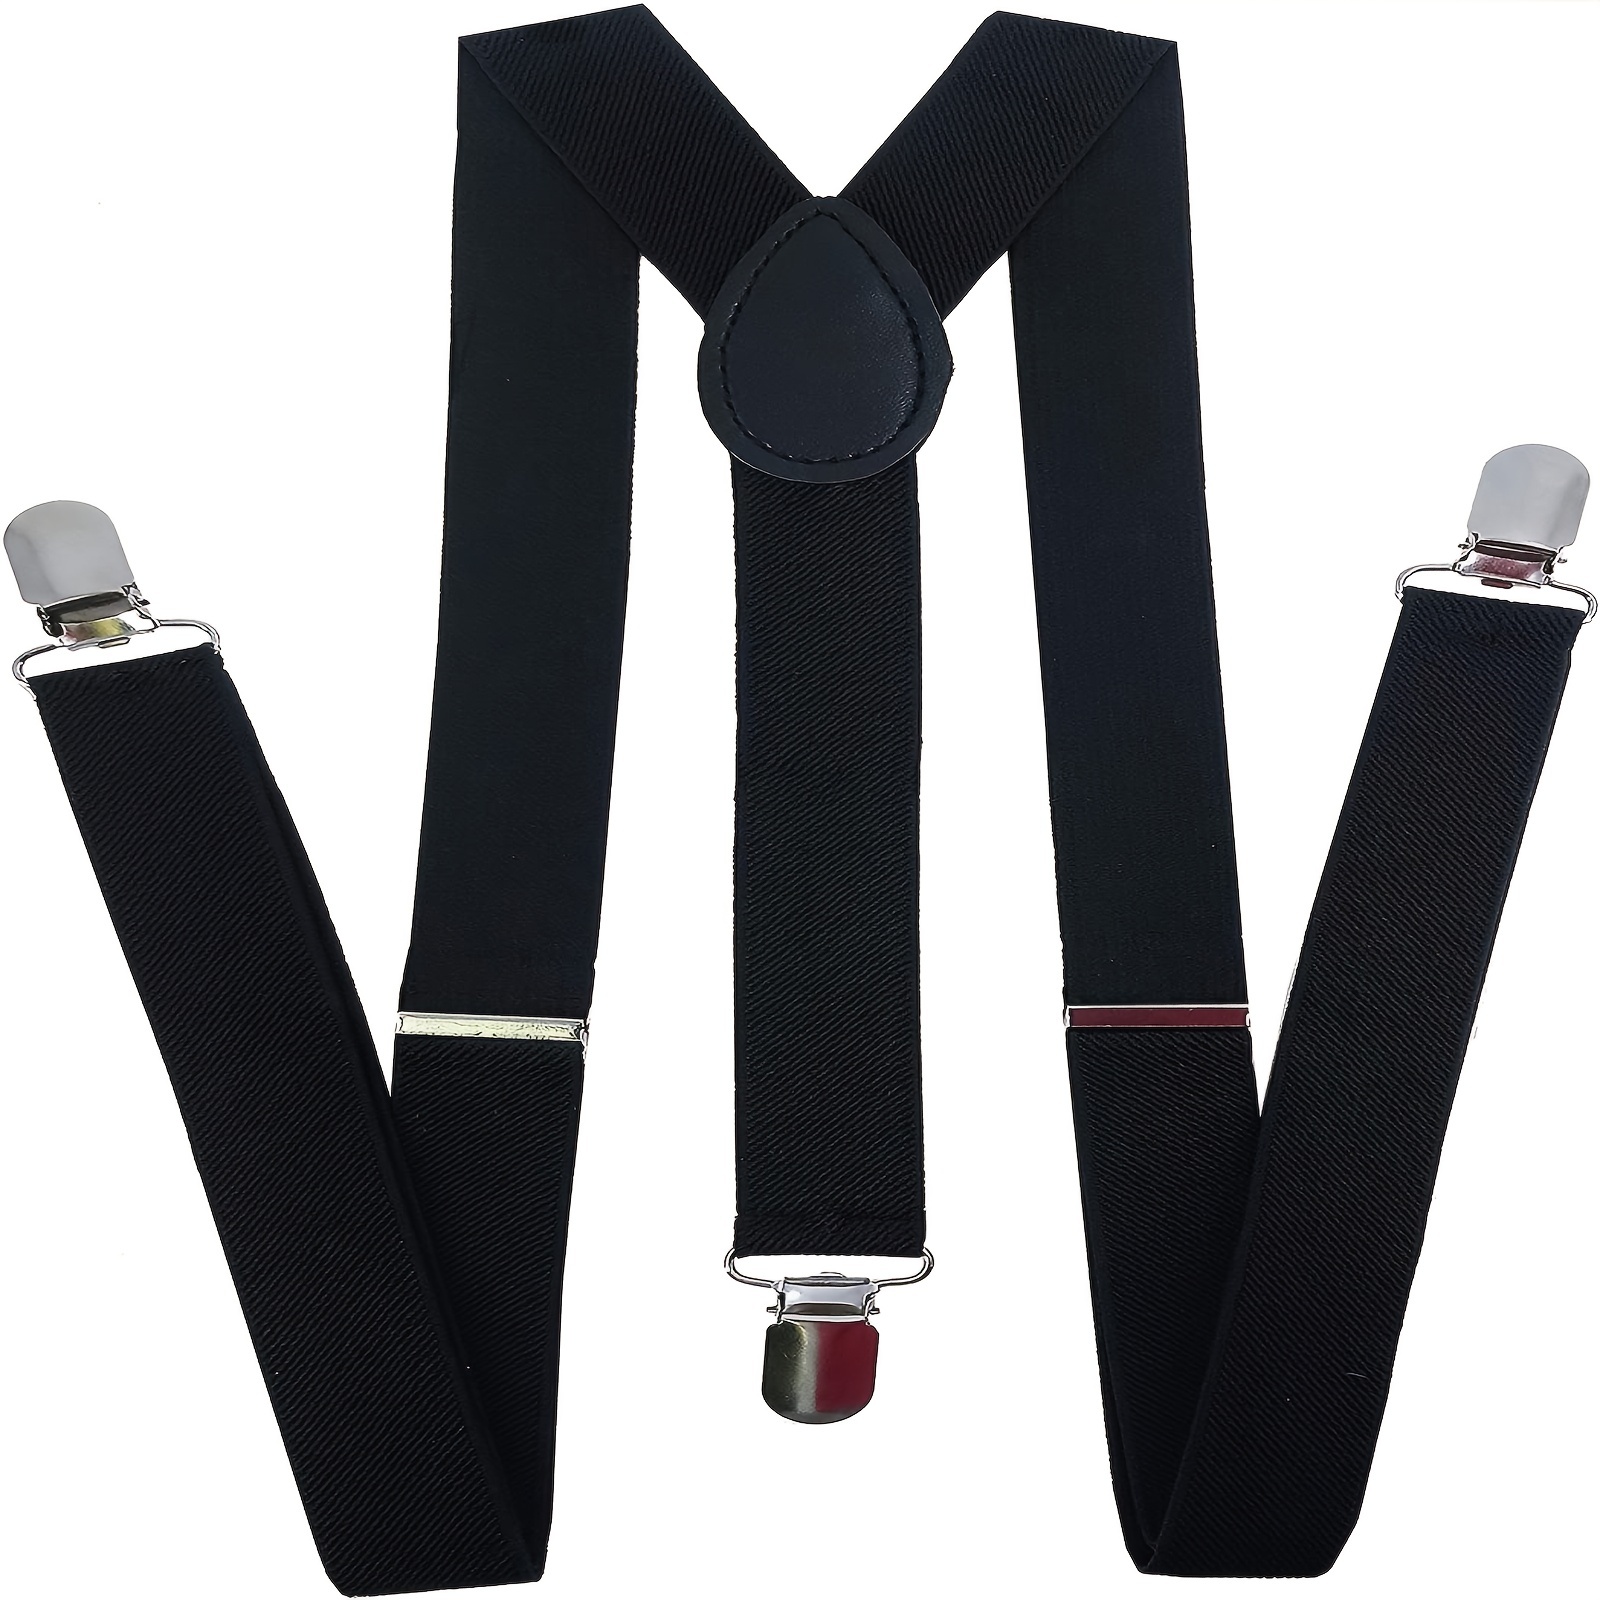 1pc Adjustable Elastic Y Back Design Mens Suspenders With Strong